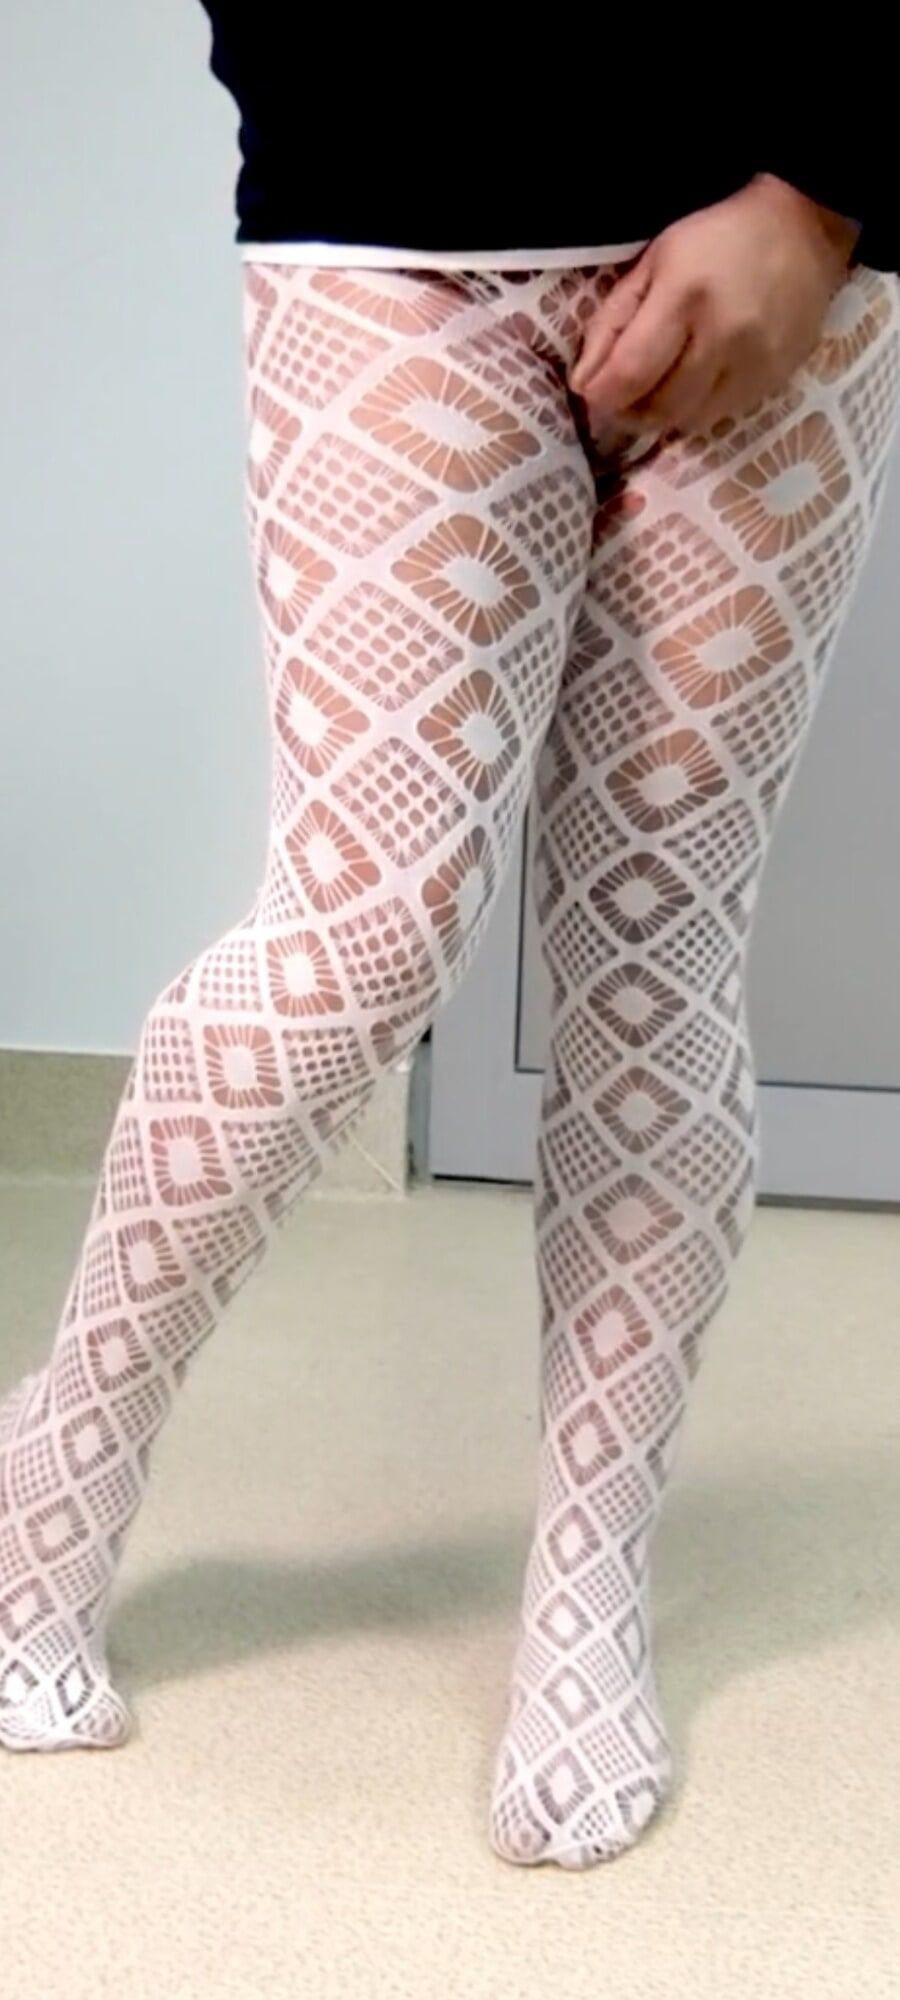 Sexy legs in pantyhose wanking sexy cock #6